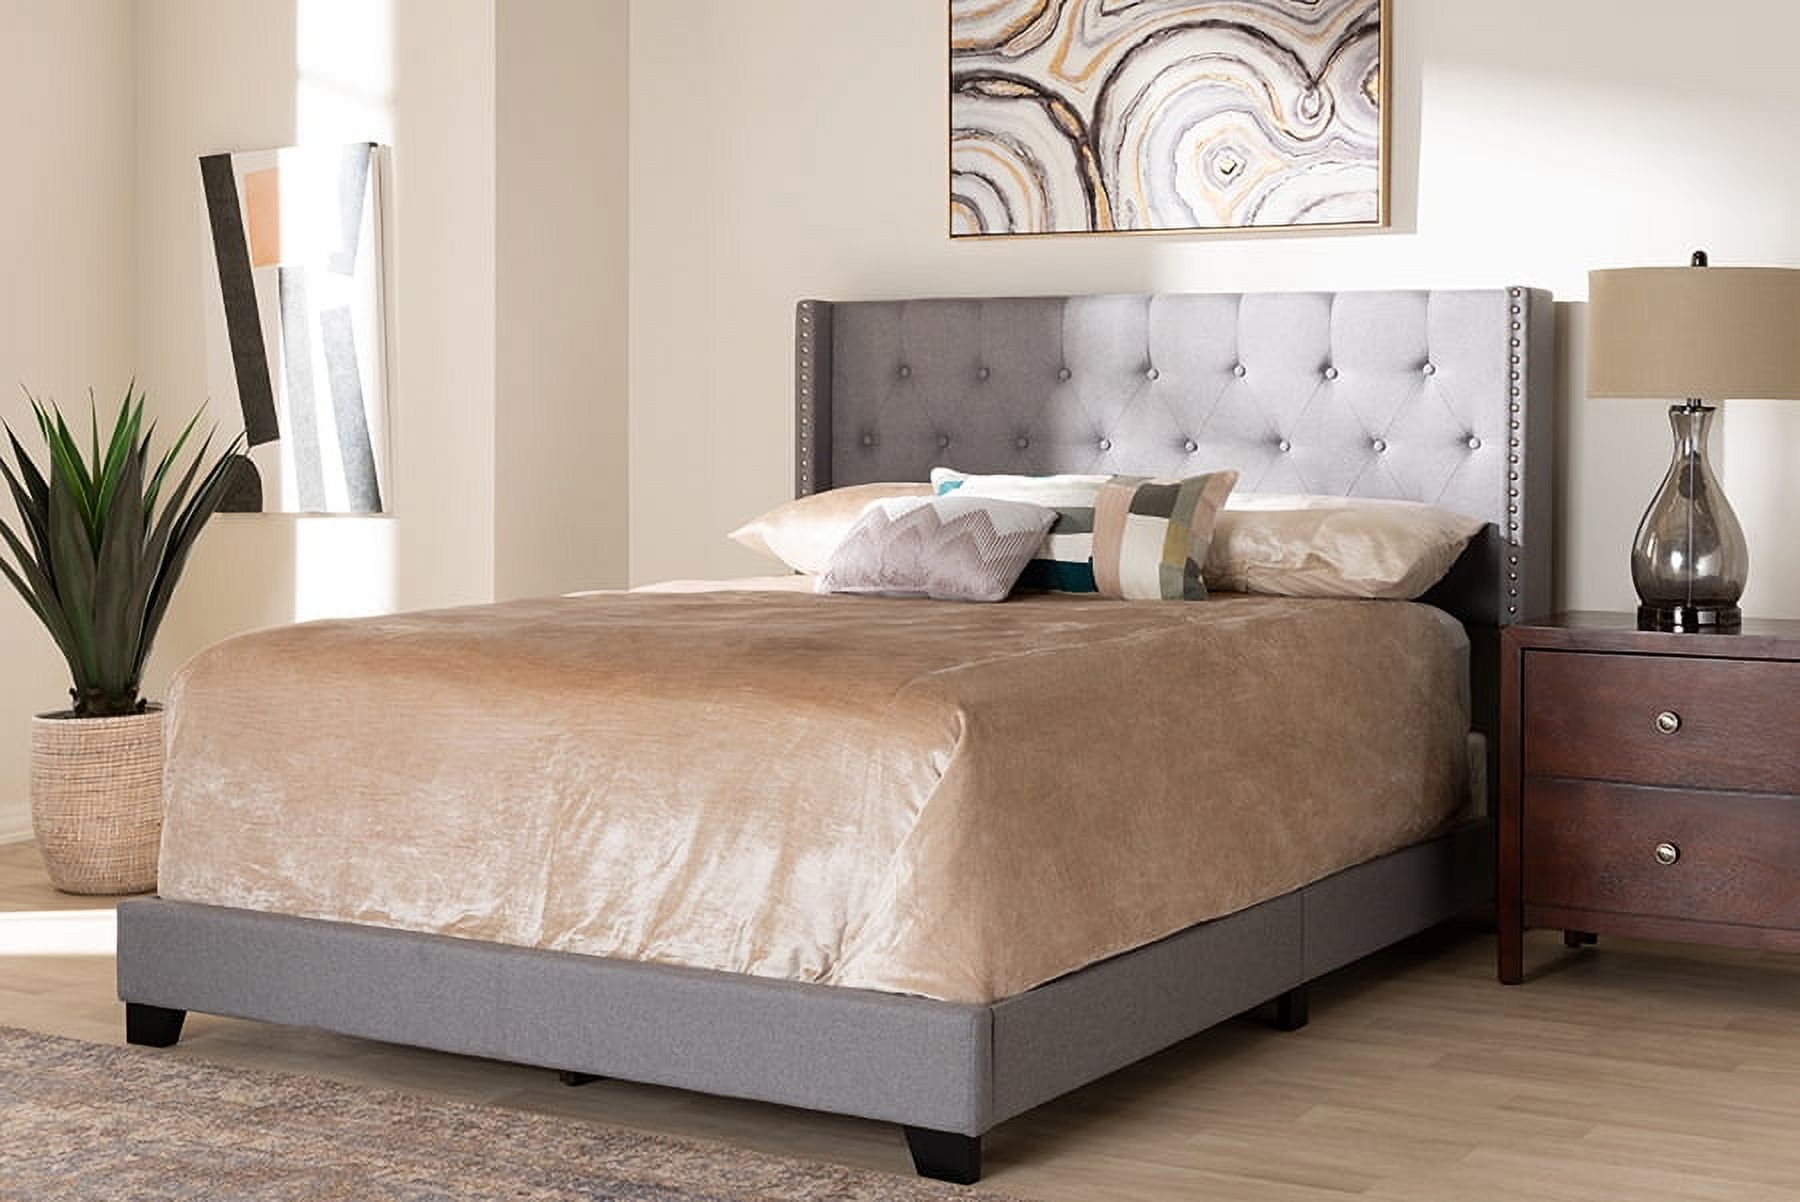 Baxton Studio Brady Modern and Contemporary Light Grey Fabric Upholstered King Size Bed - image 1 of 10